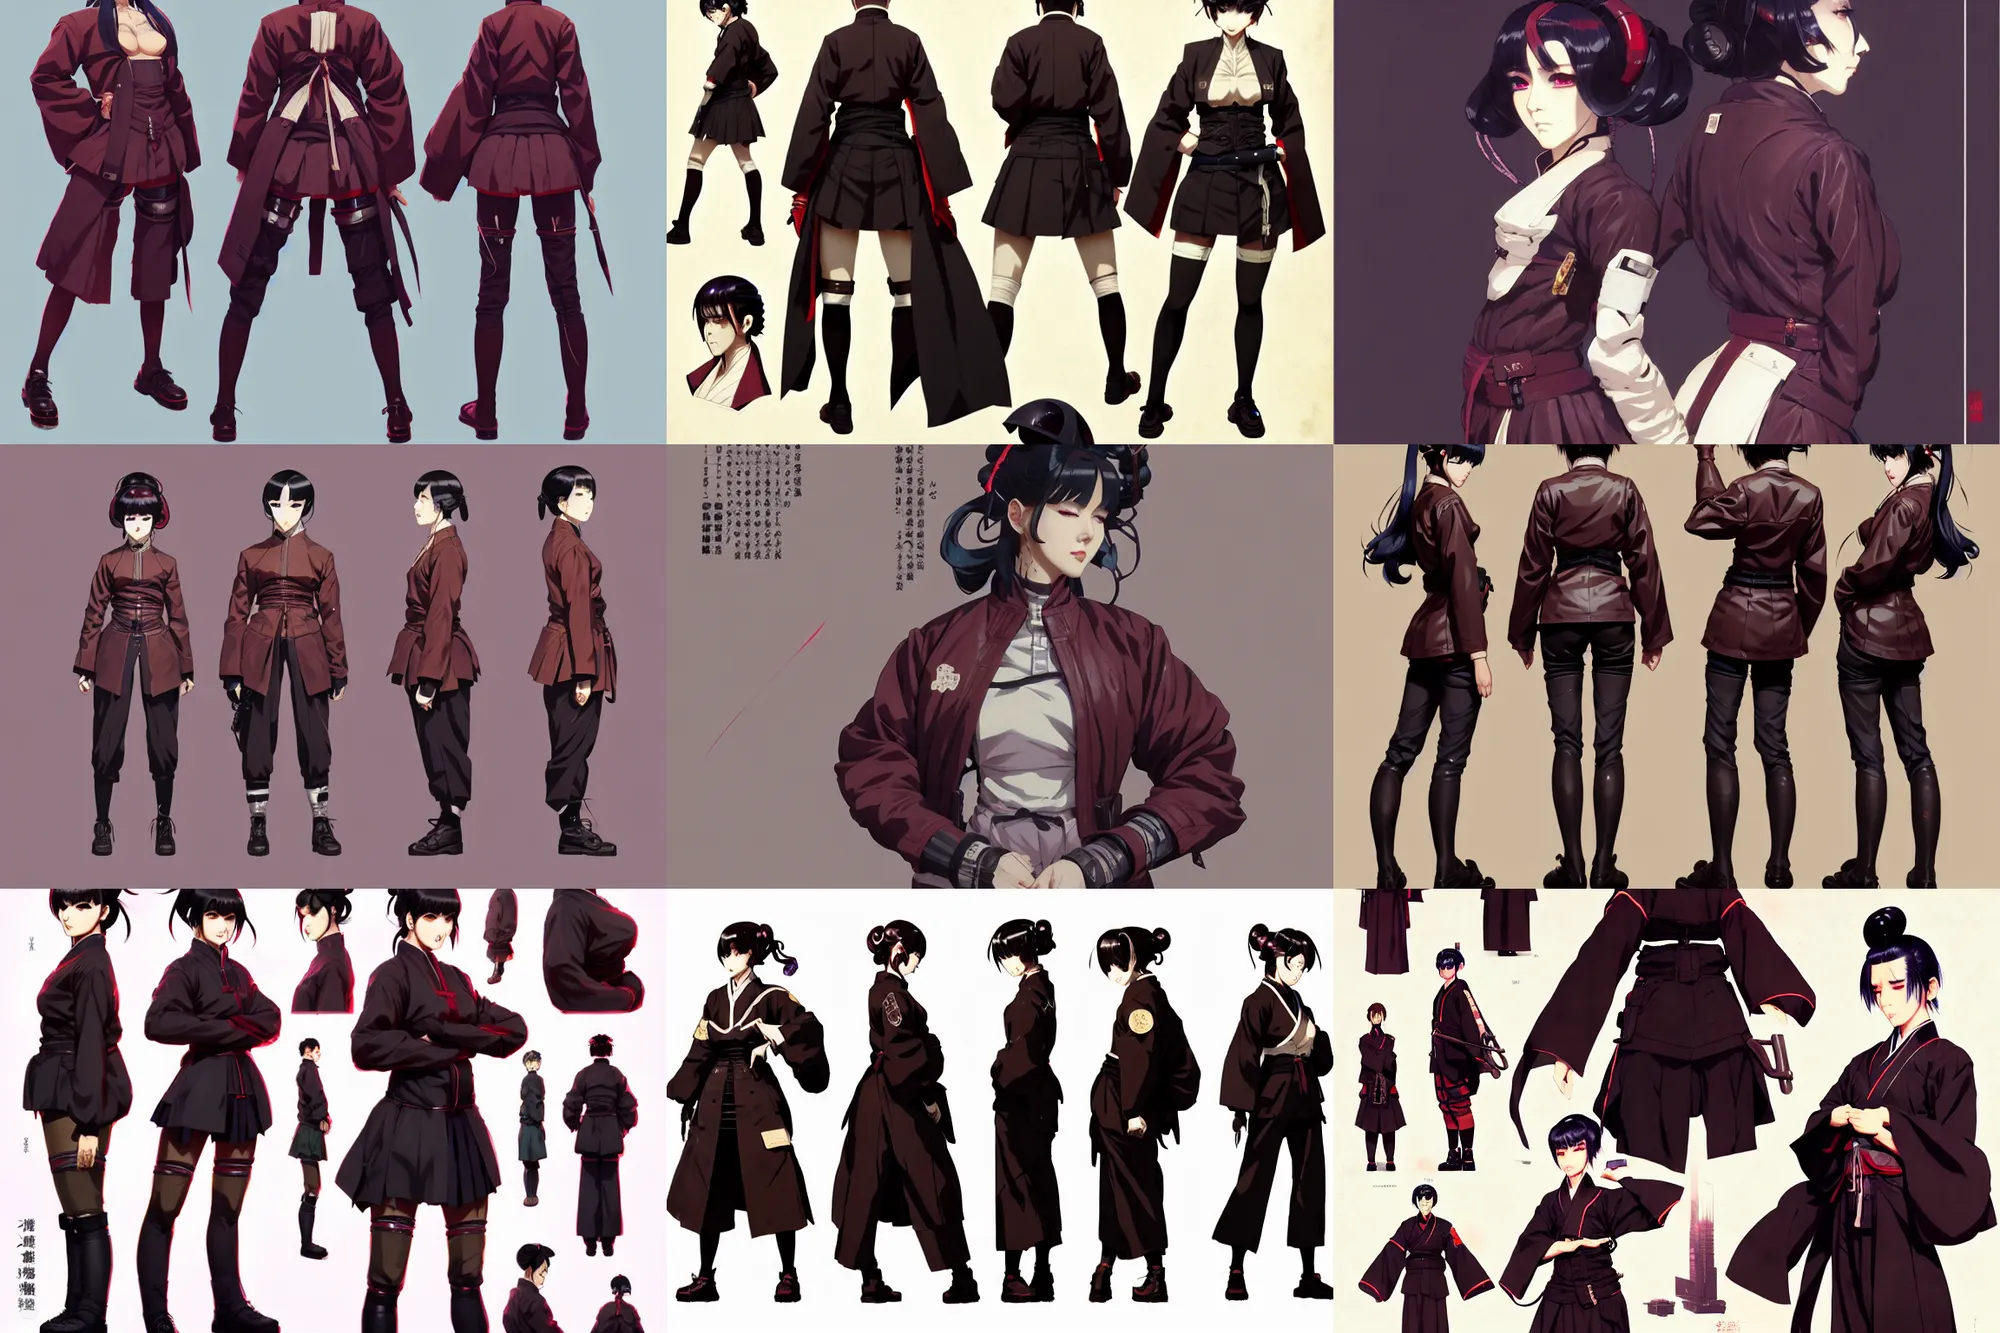 prompthunt: anime girl character sheet, mmorpg outfit